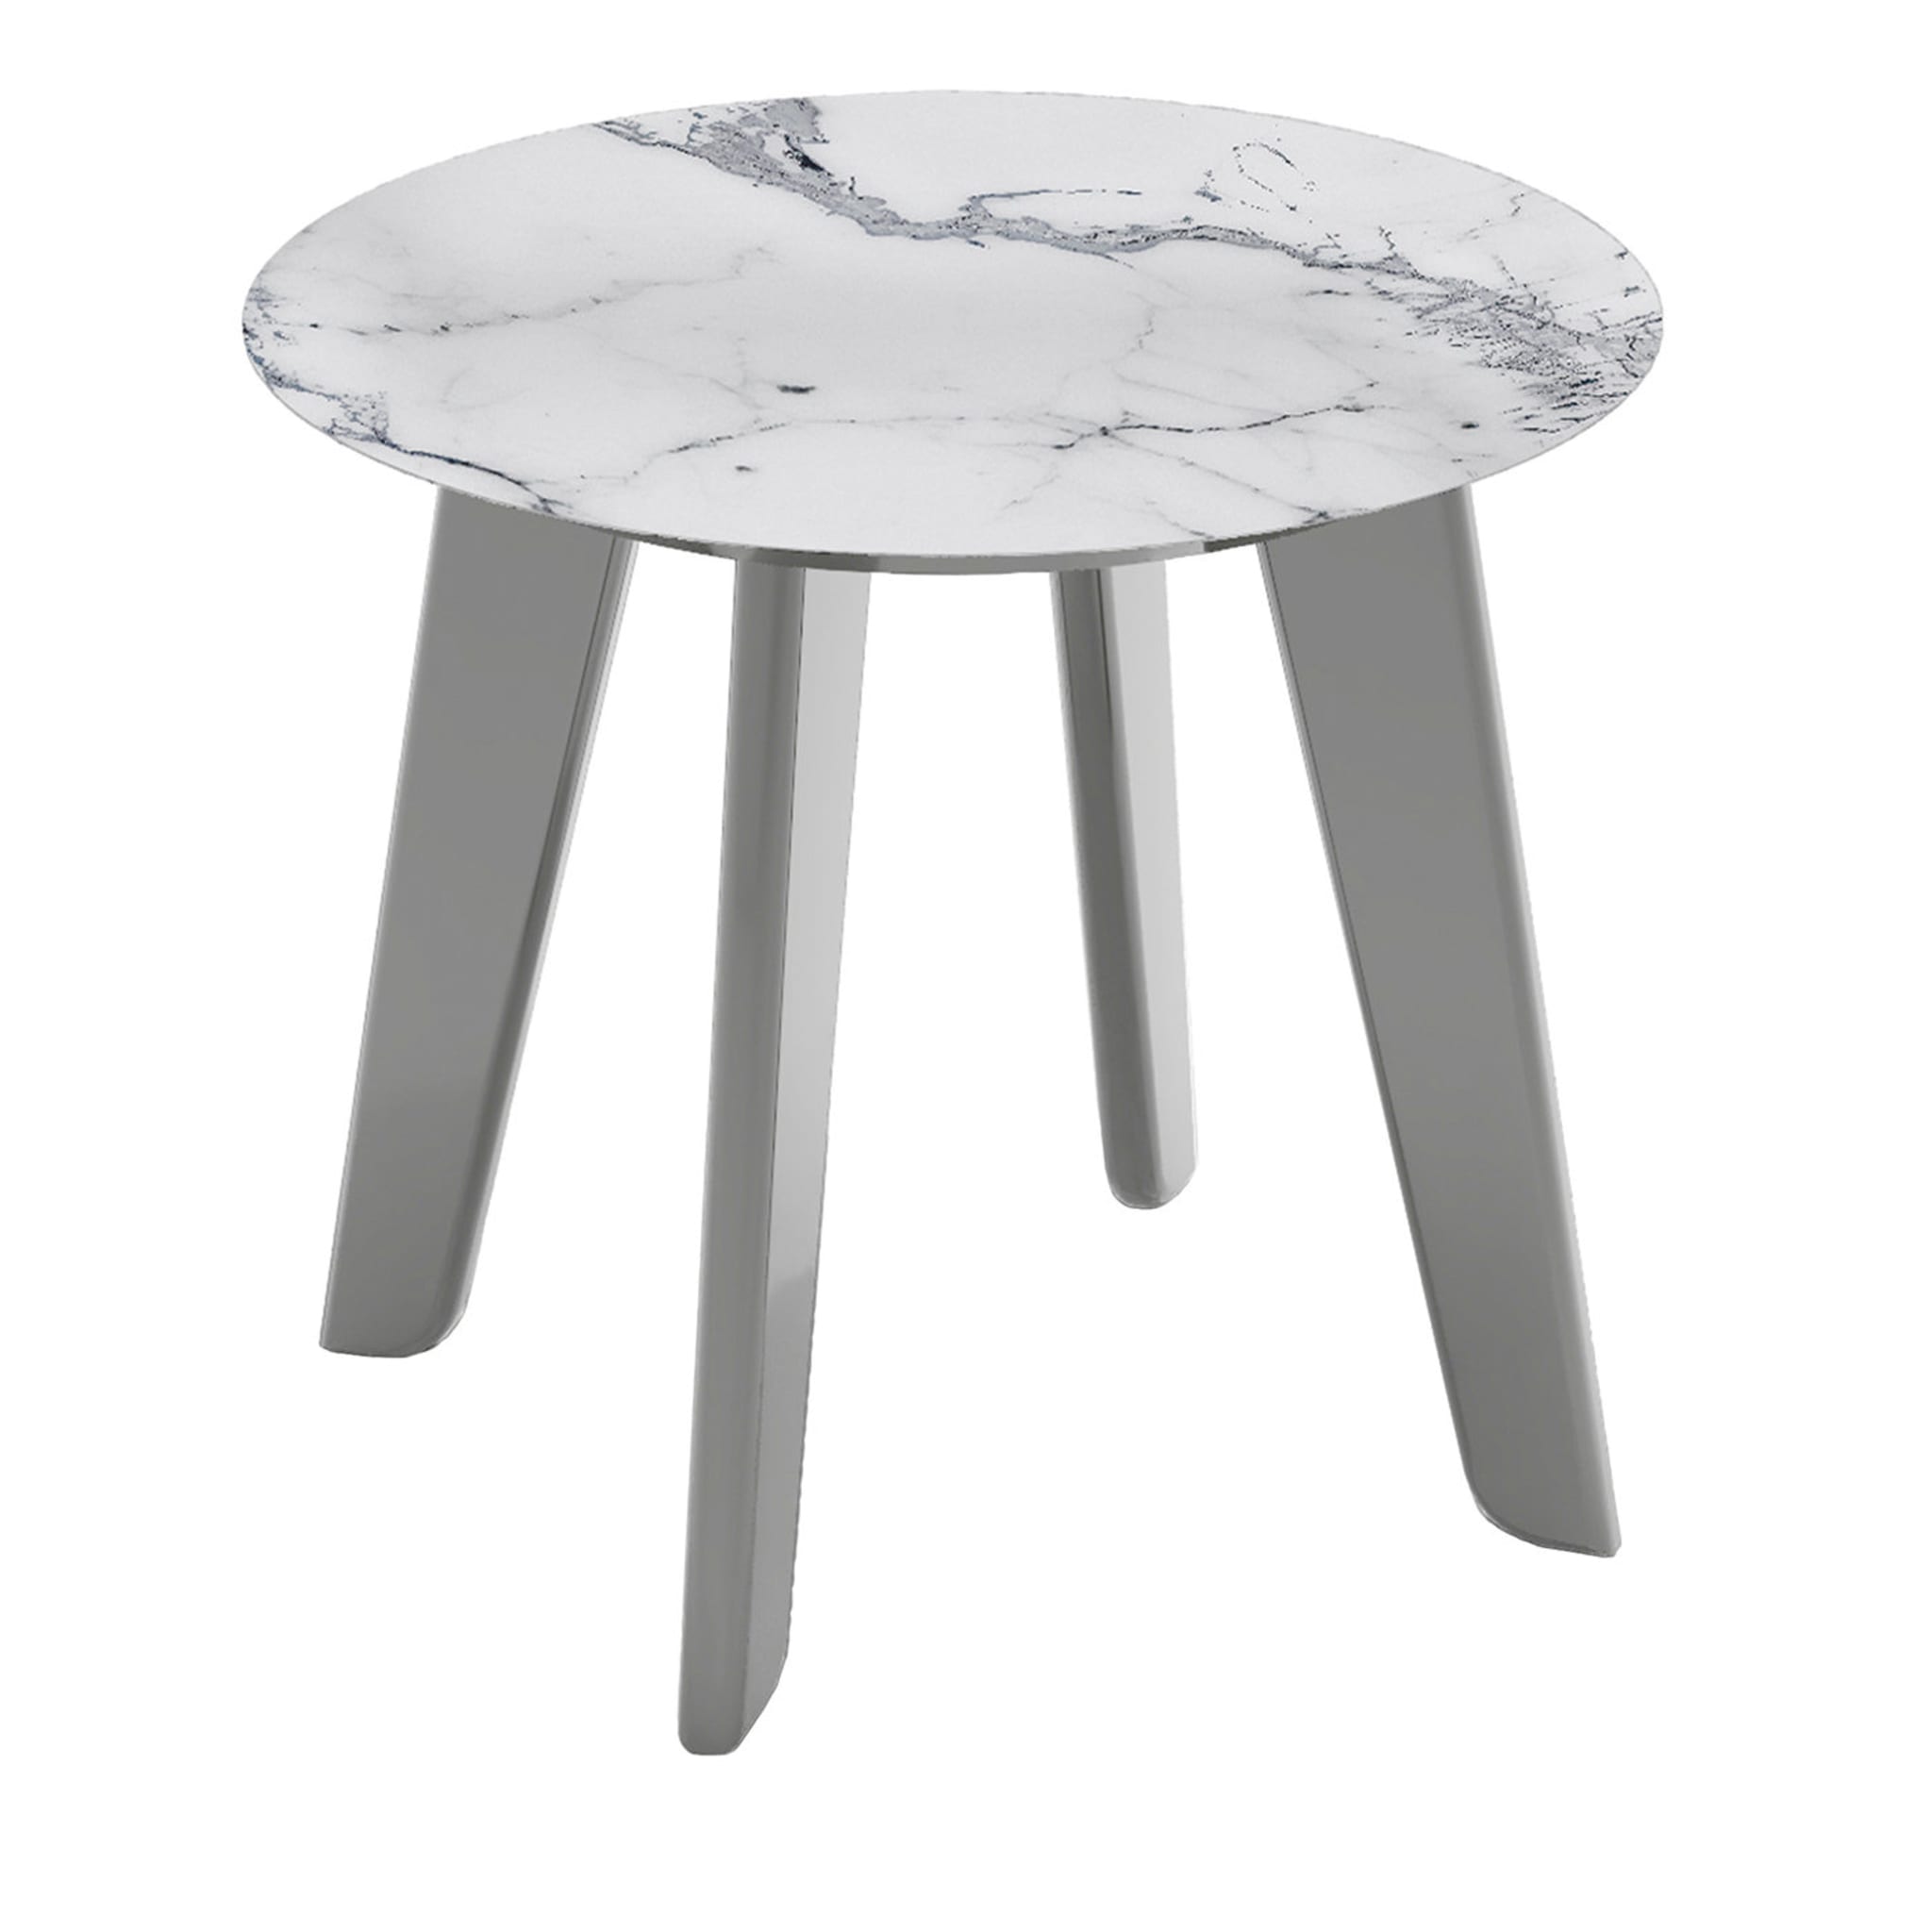 Owen Low Round Side Table with White and Gray Top (Table d'appoint ronde basse avec plateau blanc et gris) - Vue principale